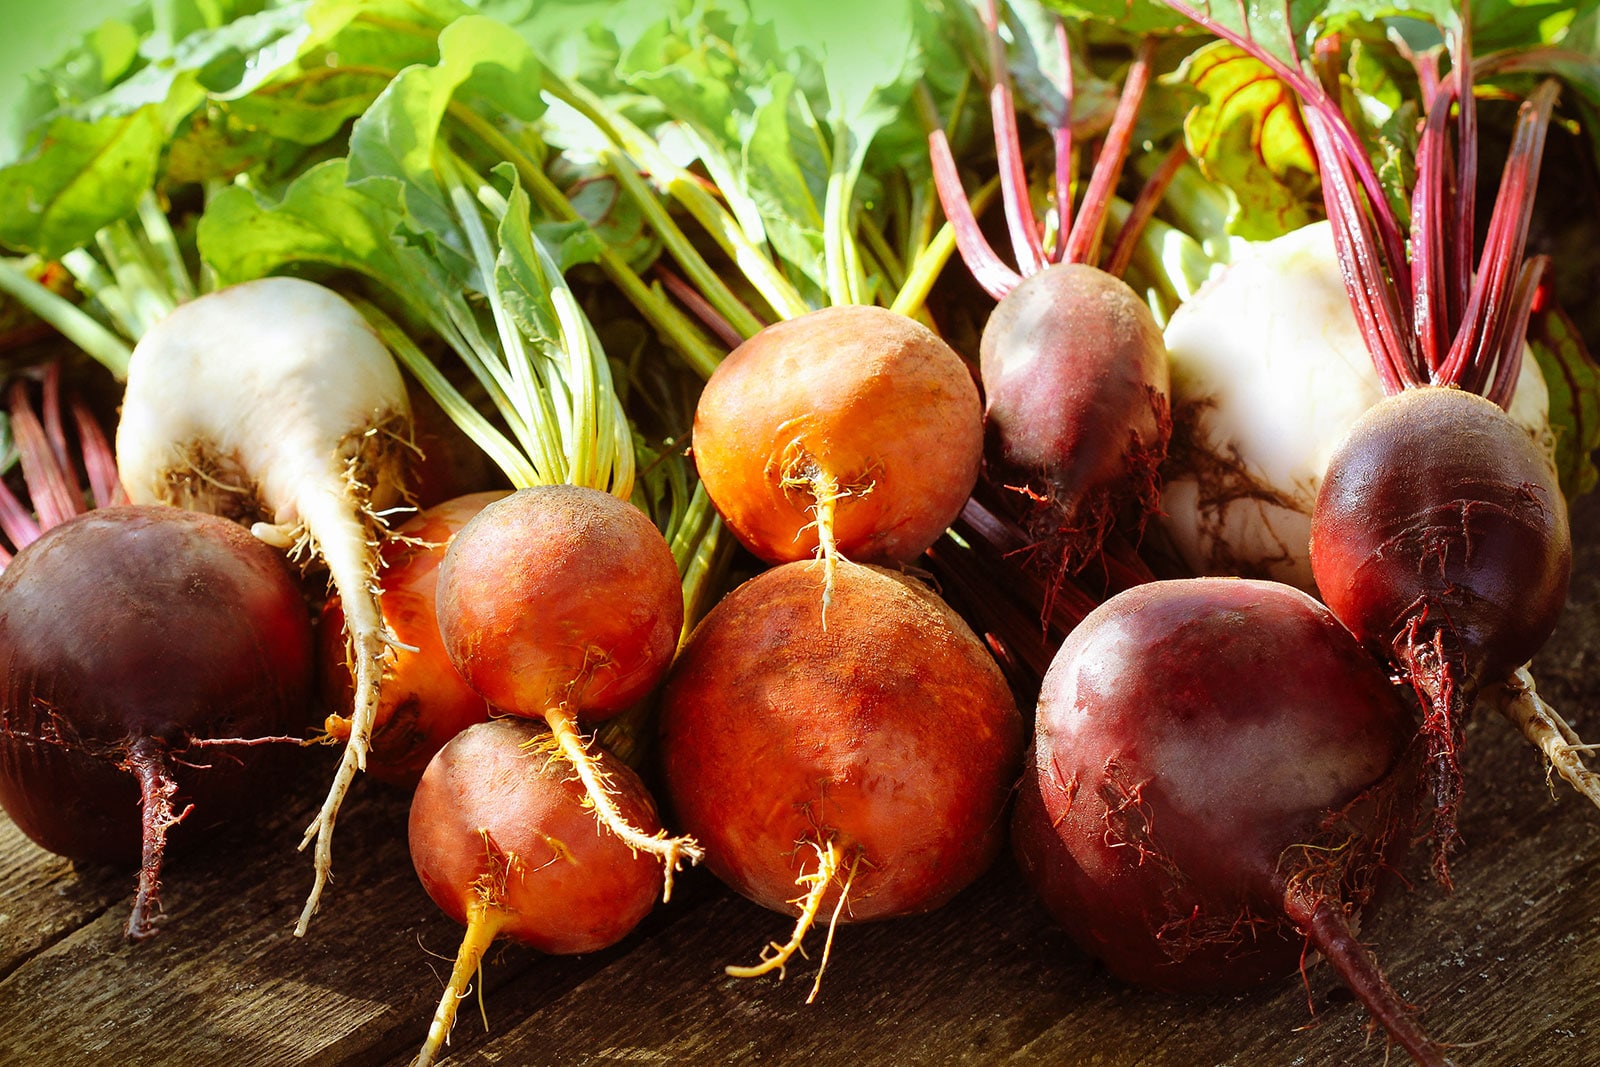 Pile of colorful red, orange, and white beets on a wooden surface